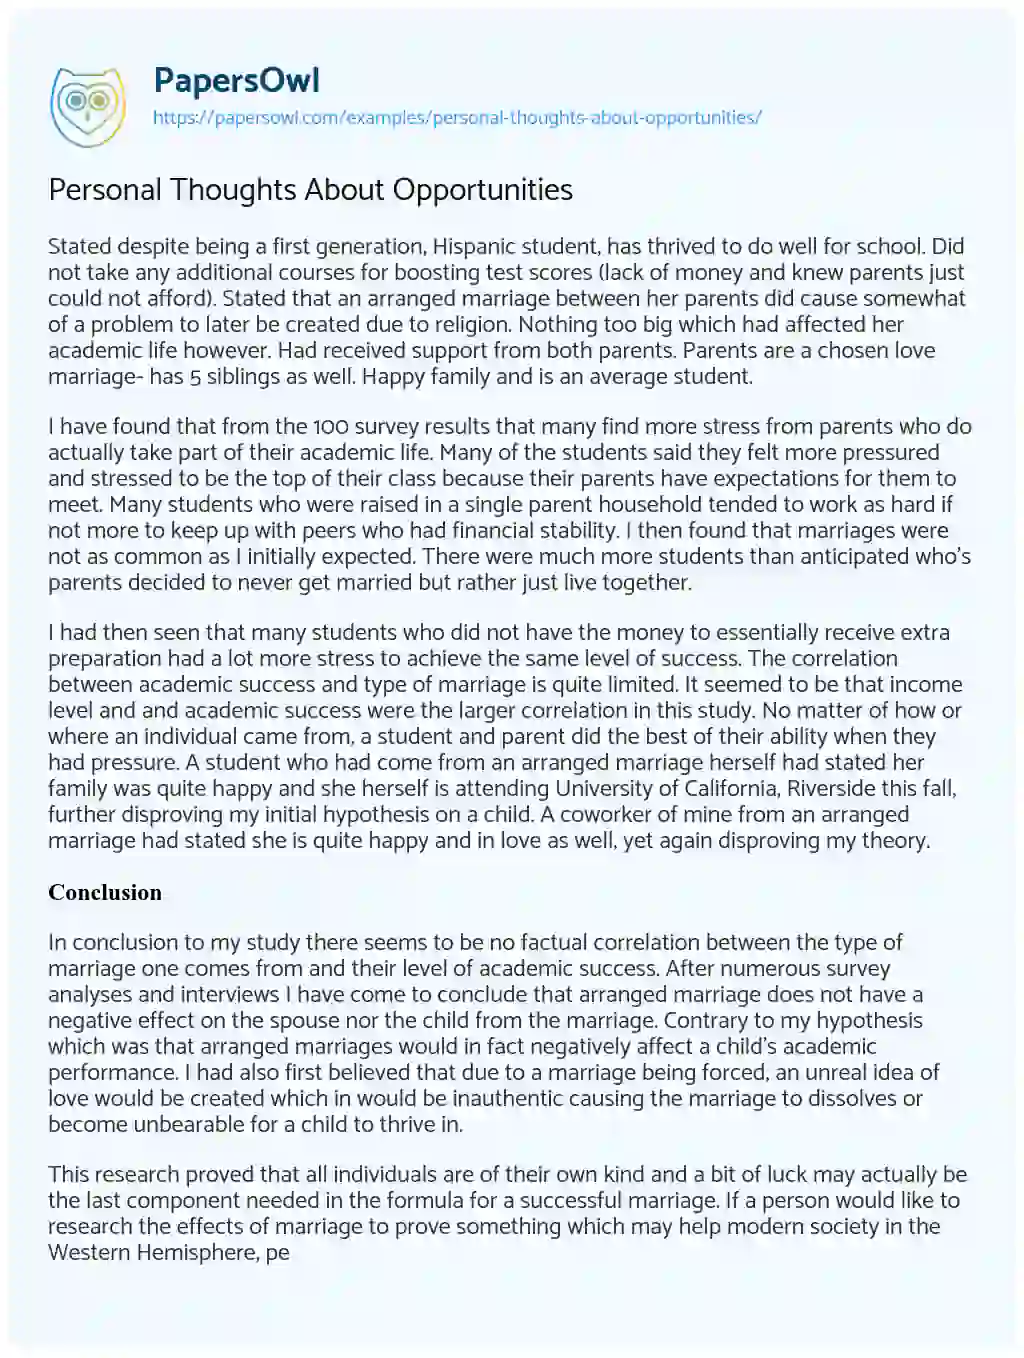 Personal Thoughts about Opportunities essay